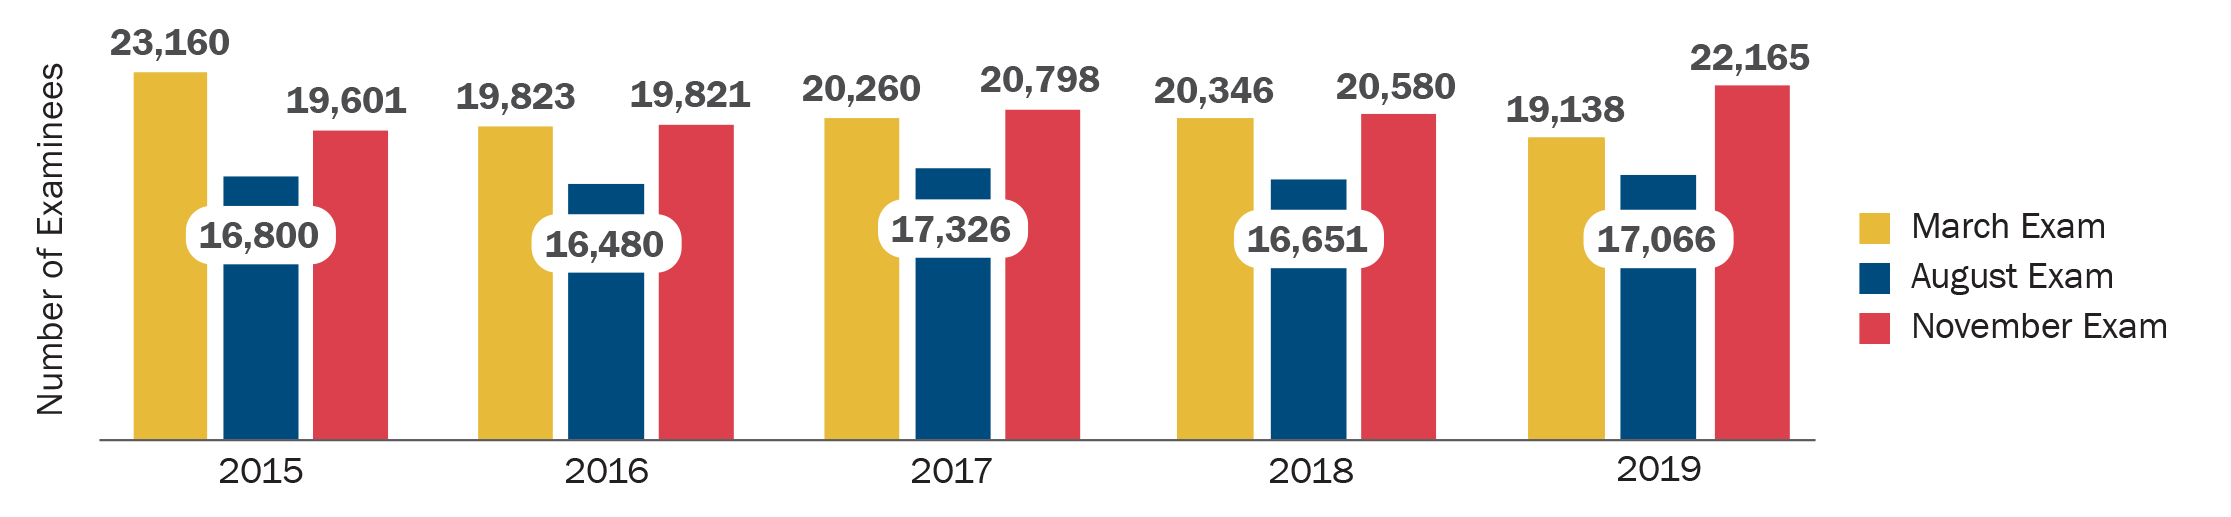 Number of MPRE Examinees 2015–2019: This bar graph shows the number of MPRE examinees for the March, August, and November administrations of the exam in the past five years. In 2015, there were 23,160 examinees in March, 16,800 in August, and 19,601 in November; in 2016, there were 19,823 examinees in March, 16,480 in August, and 19,821 in November; in 2017 there were 20,260 examinees in March, 17,326 in August, and 20,798 in November; in 2018 there were 20,346 examinees in March, 16,651 in August, and 20,580 in November; and in 2019 there were 19,138 examinees in March, 17,066 in August and 22,165 in November.